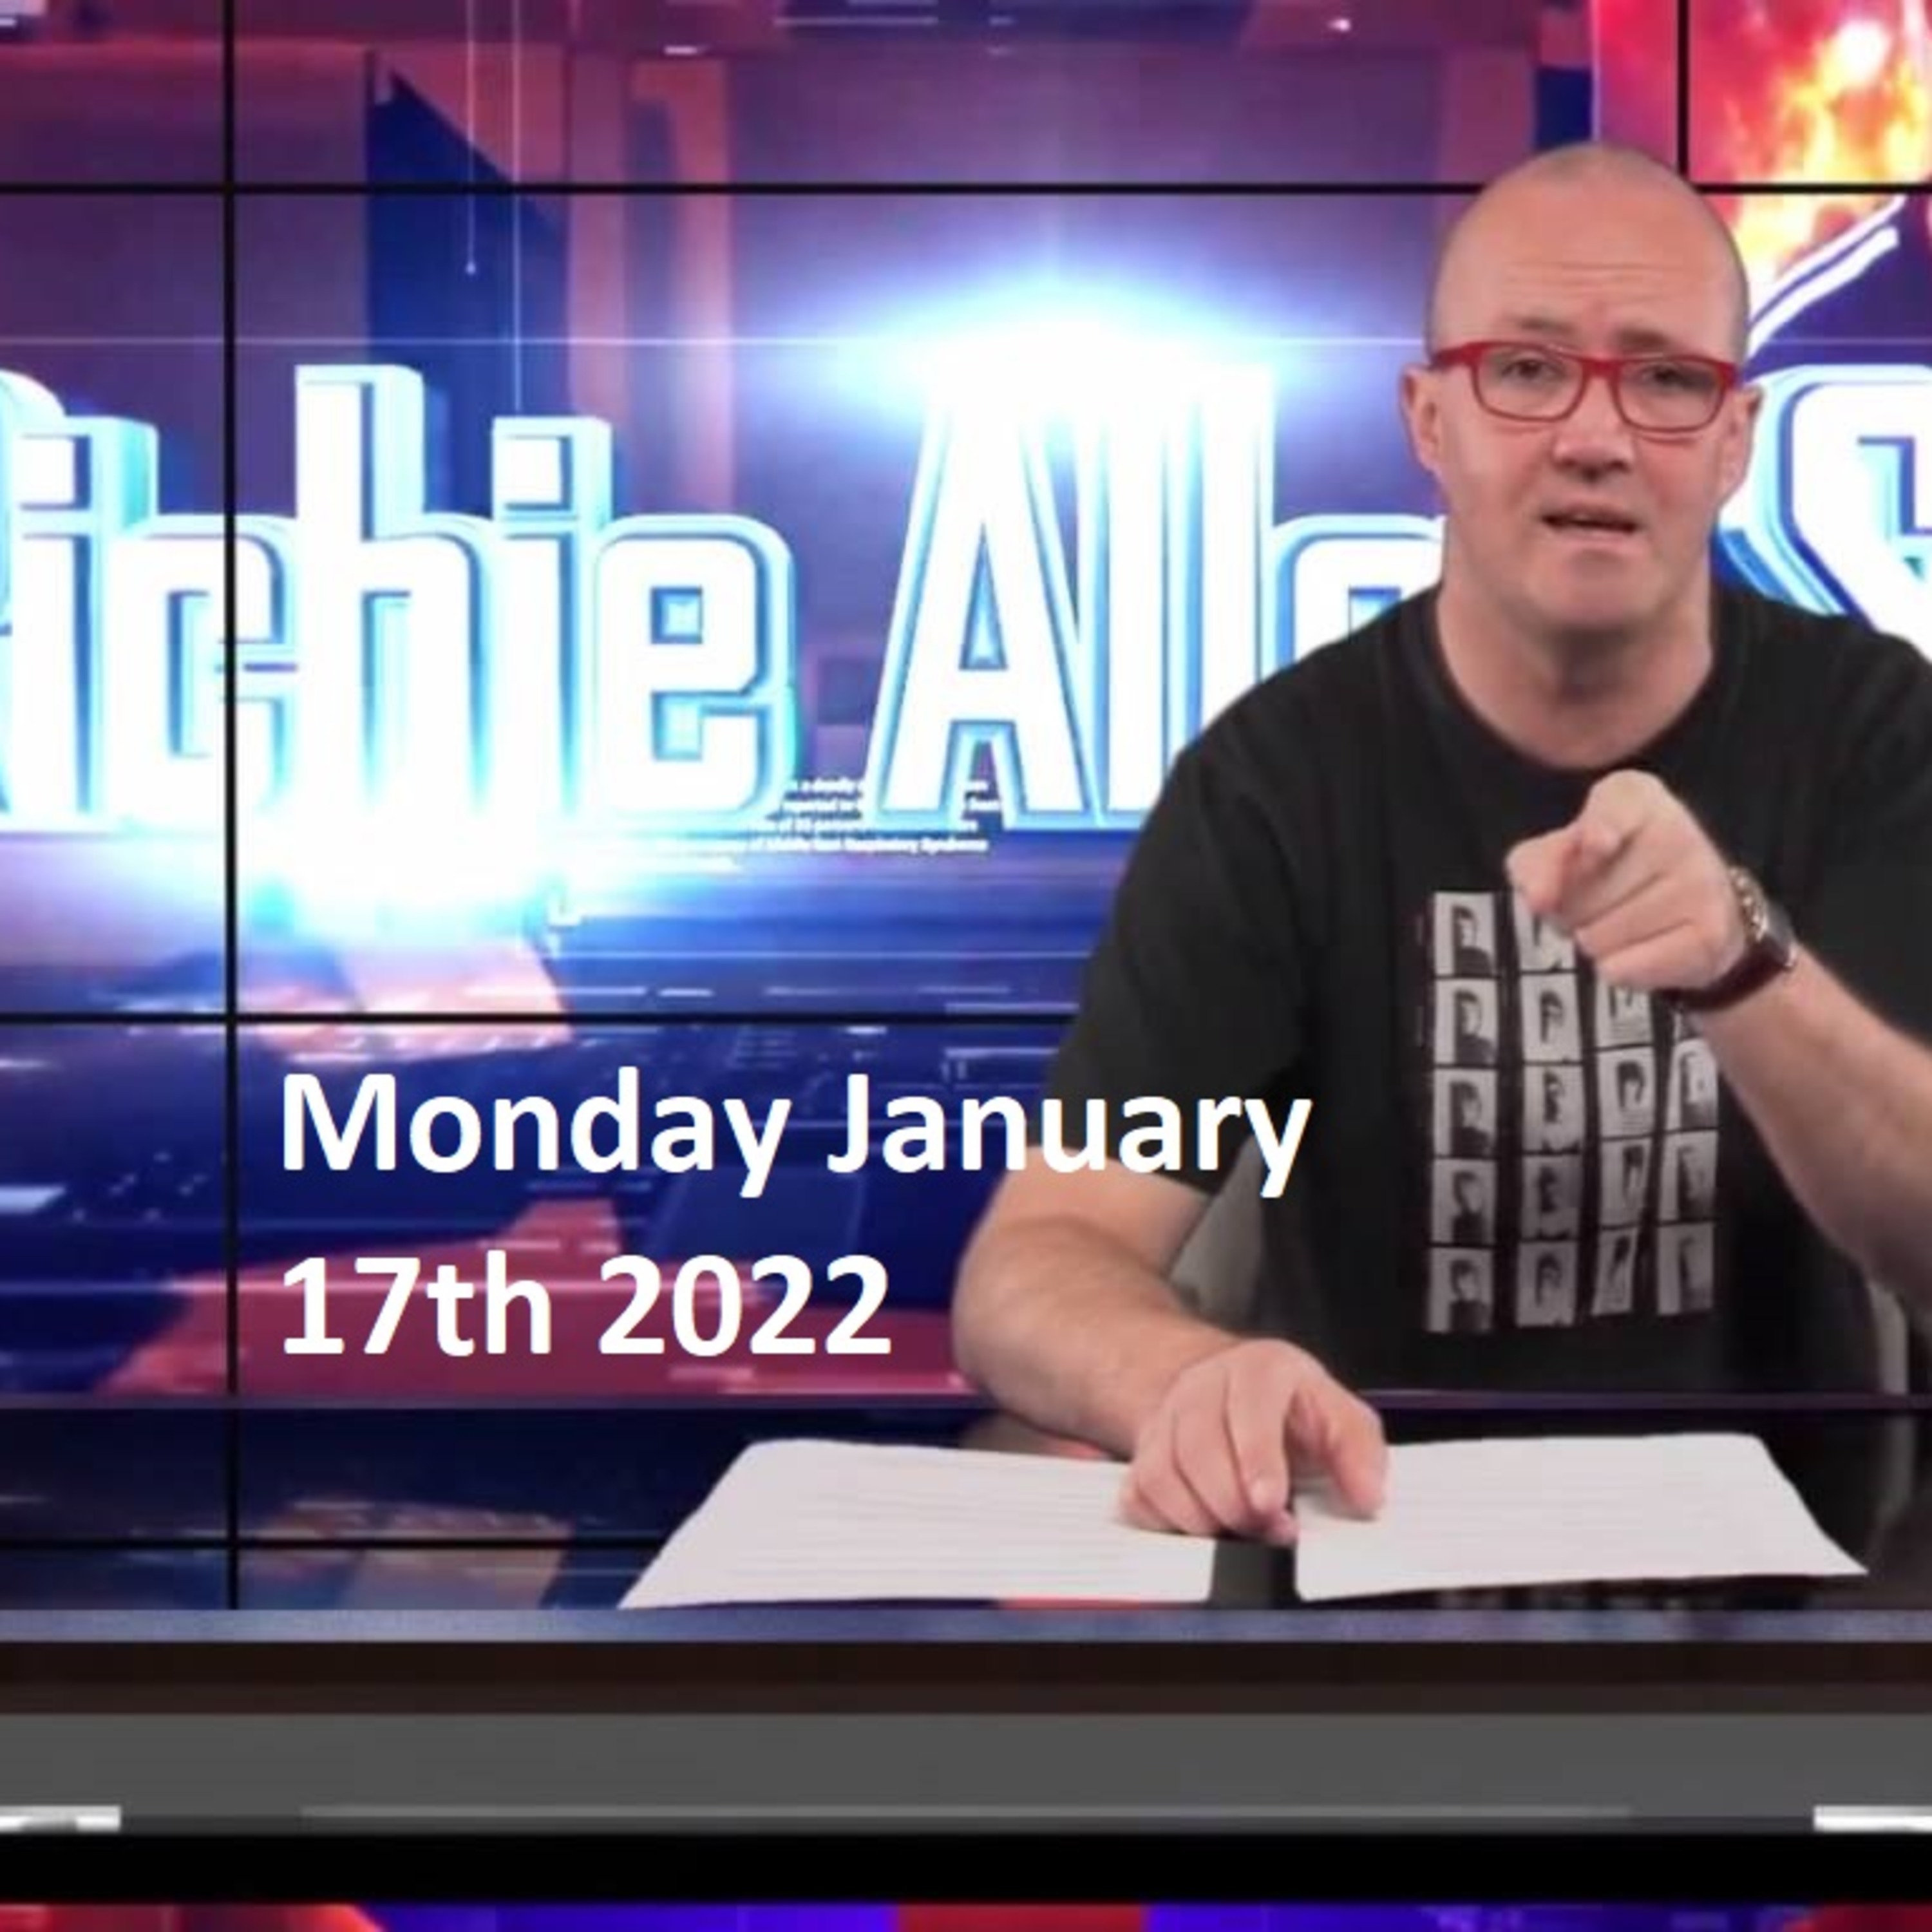 Episode 1390: The Richie Allen Show Monday January 17th 2022